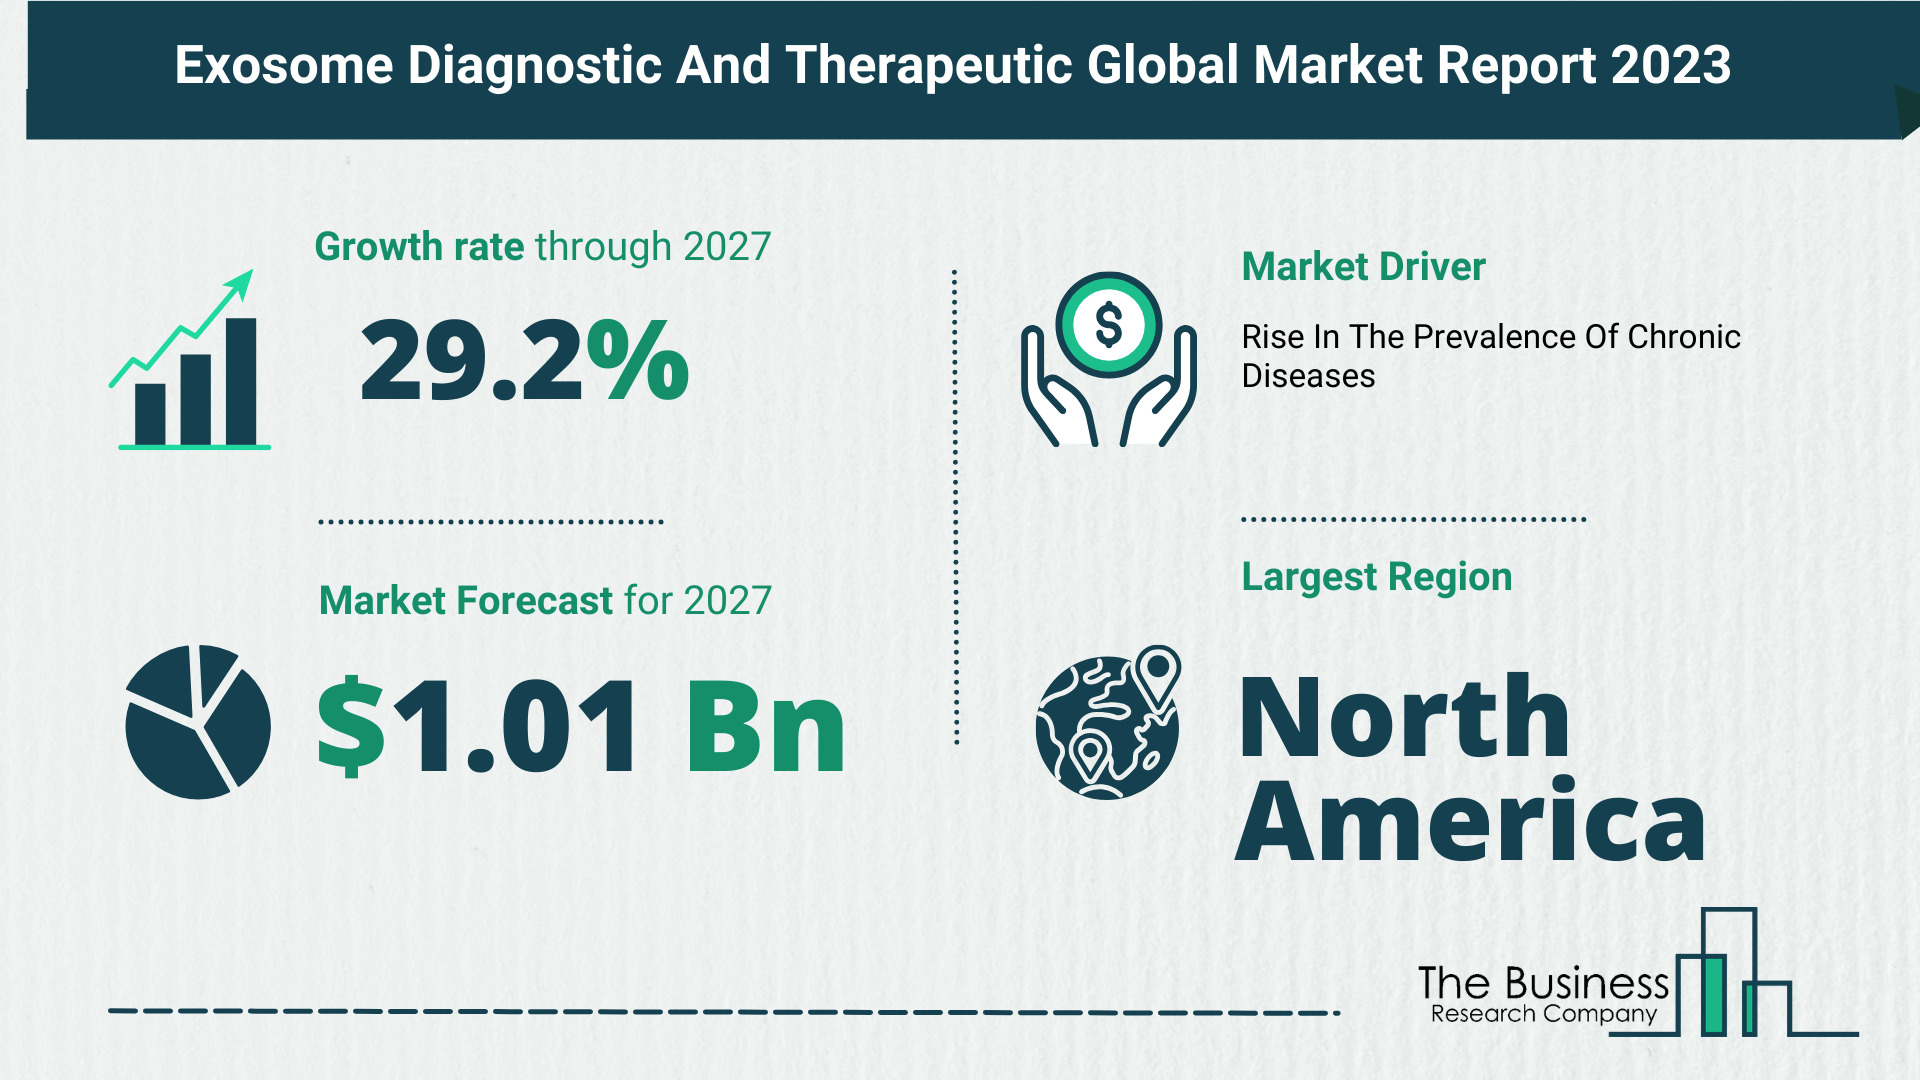 Key Insights On The Exosome Diagnostic And Therapeutic Market 2023 – Size, Driver, And Major Players